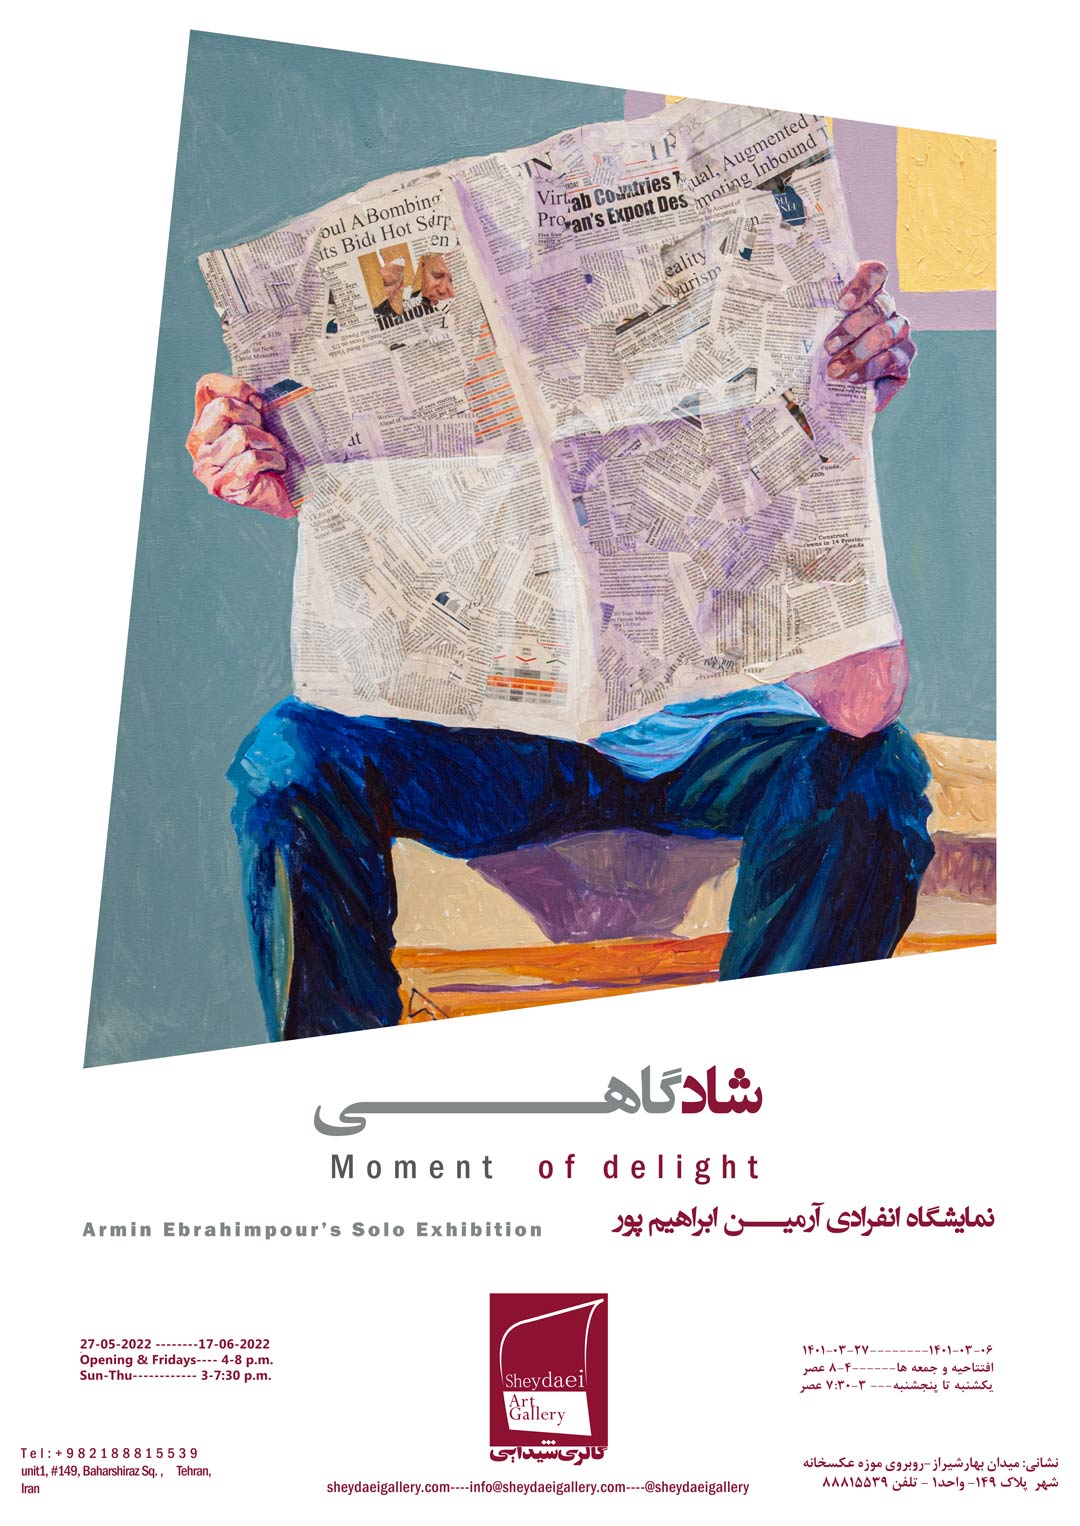 "Solo exhibition of Armin Ebrahimpour -Sheydei Gallery"